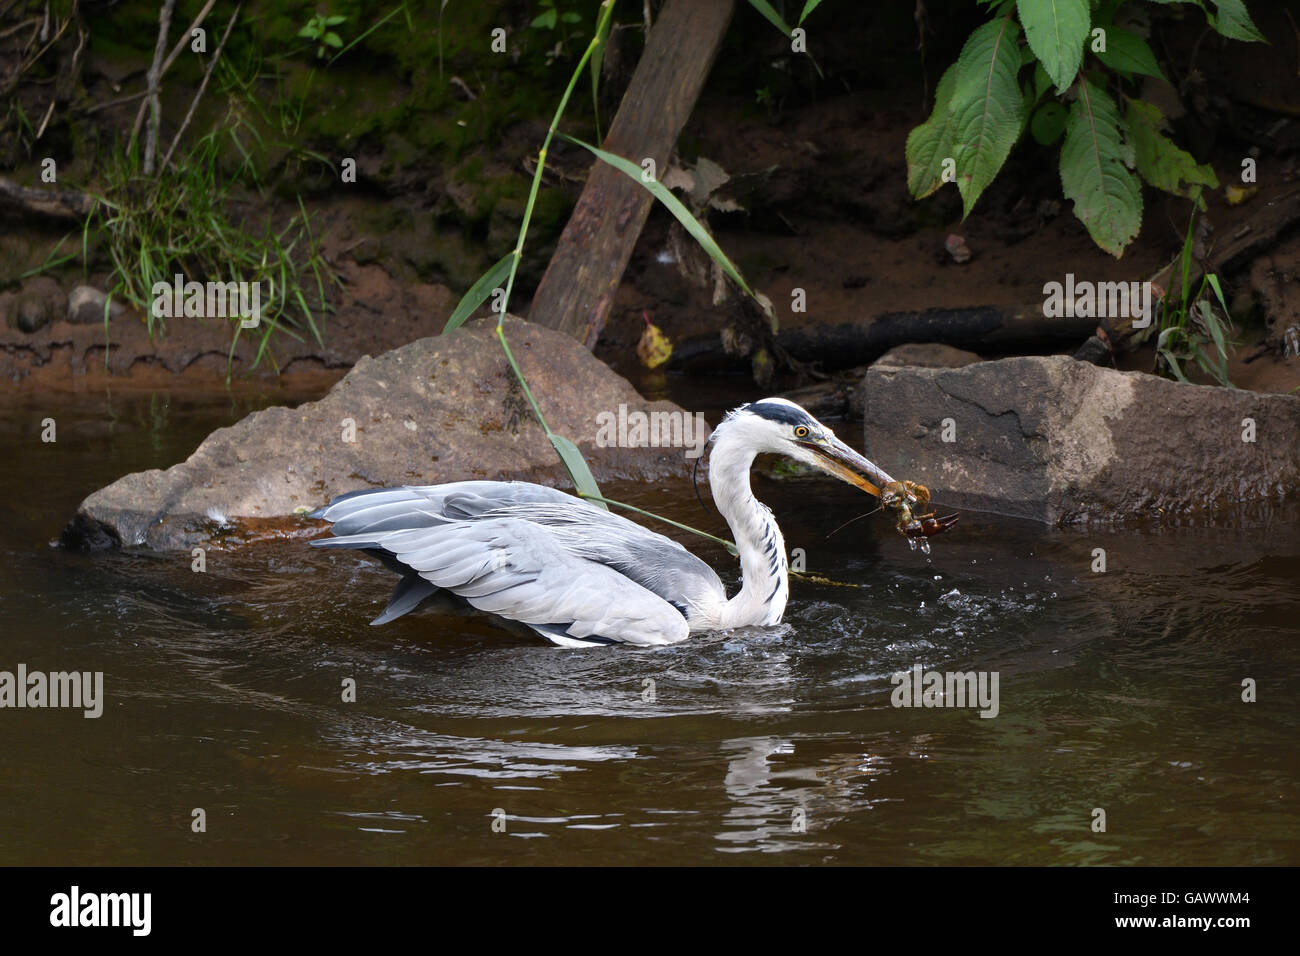 Manchester  UK  5th July 2016 After a long wait  a heron finally catches its food in the River Mersey between Didsbury and Northenden in South Manchester Credit:  John Fryer/Alamy Live News Stock Photo